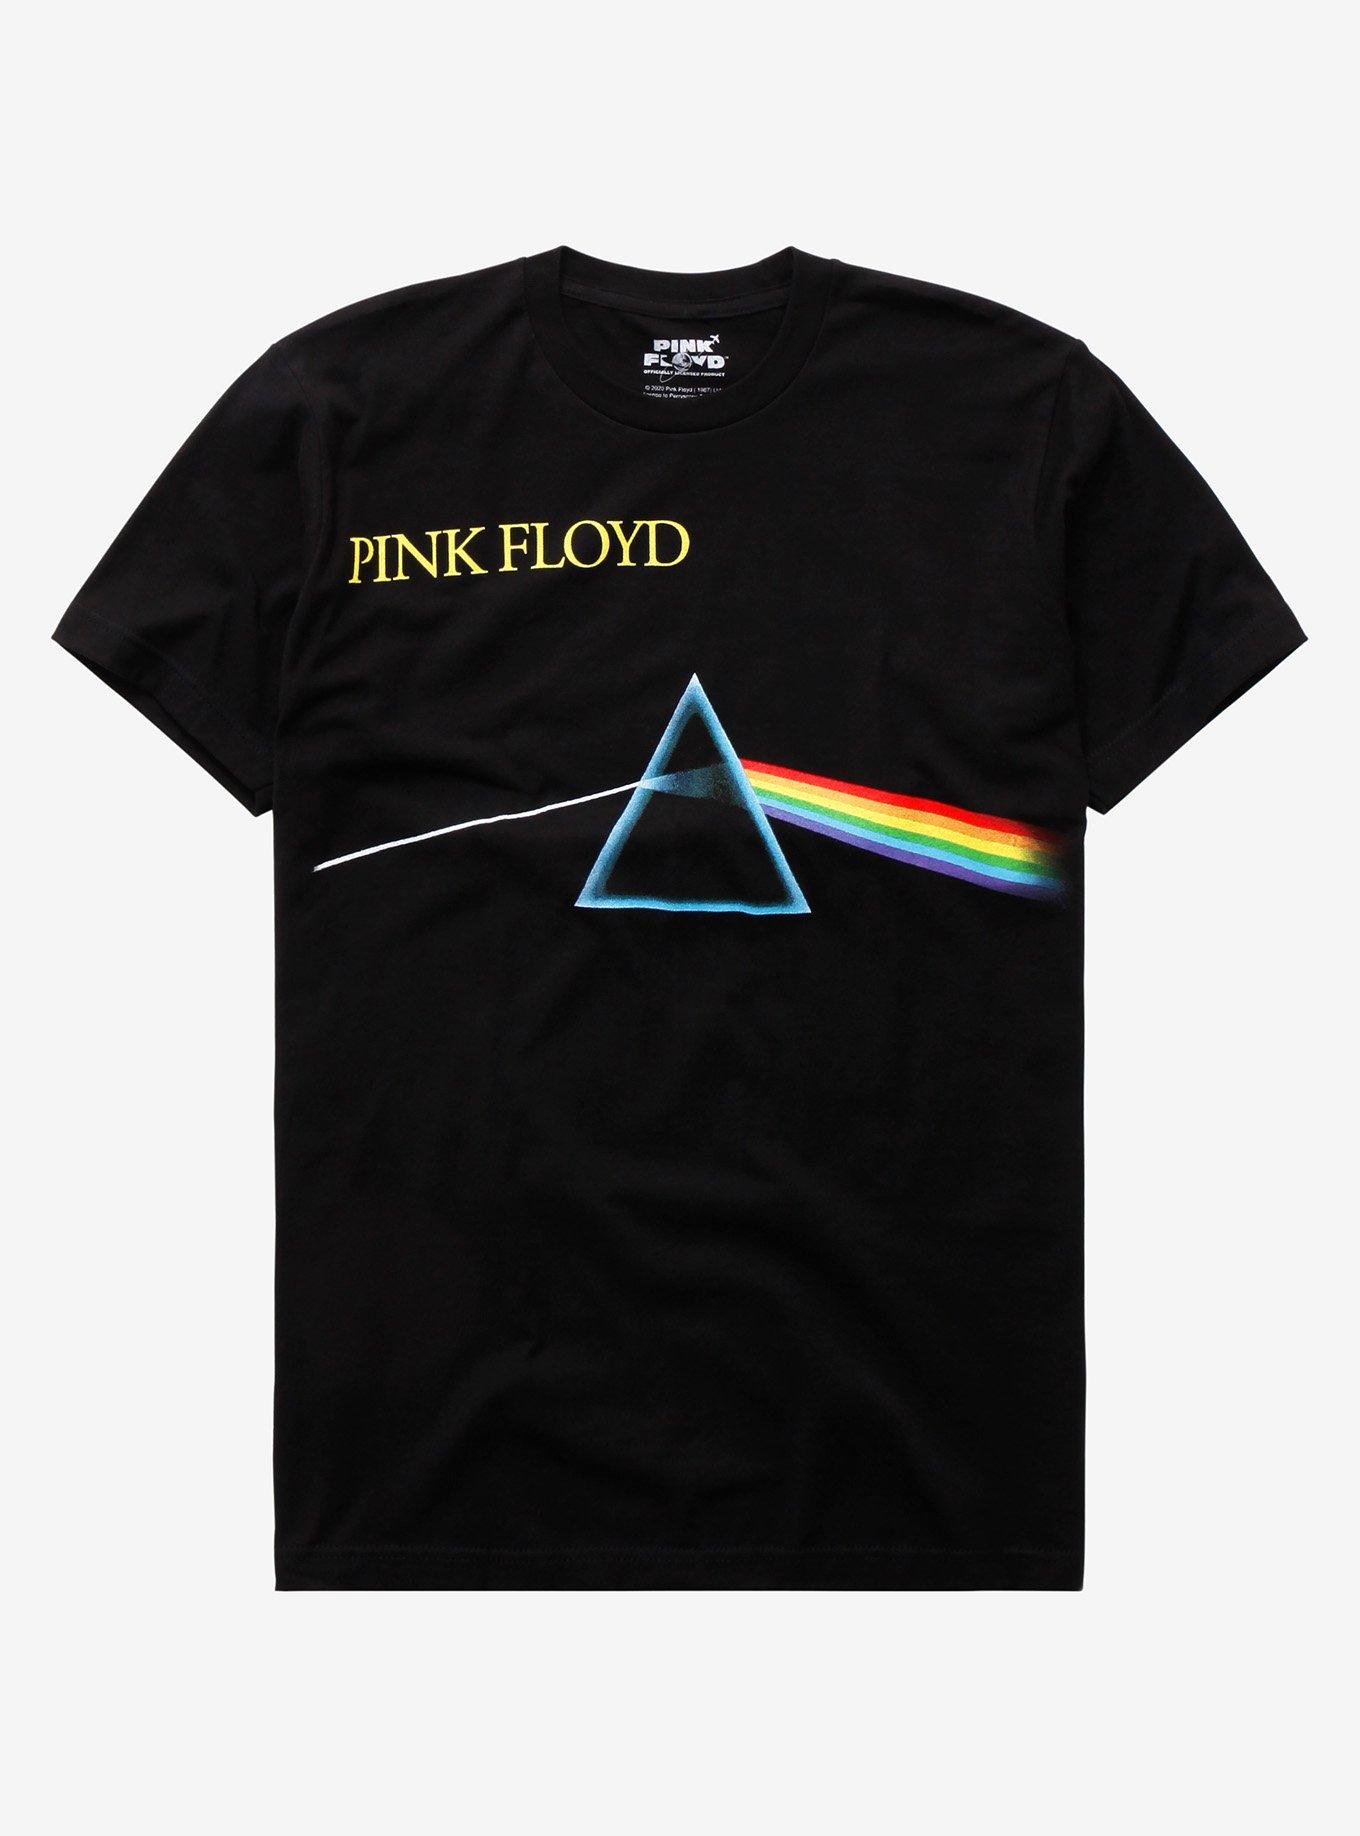 Pink Floyd Prism T-Shirt | Hot Topic